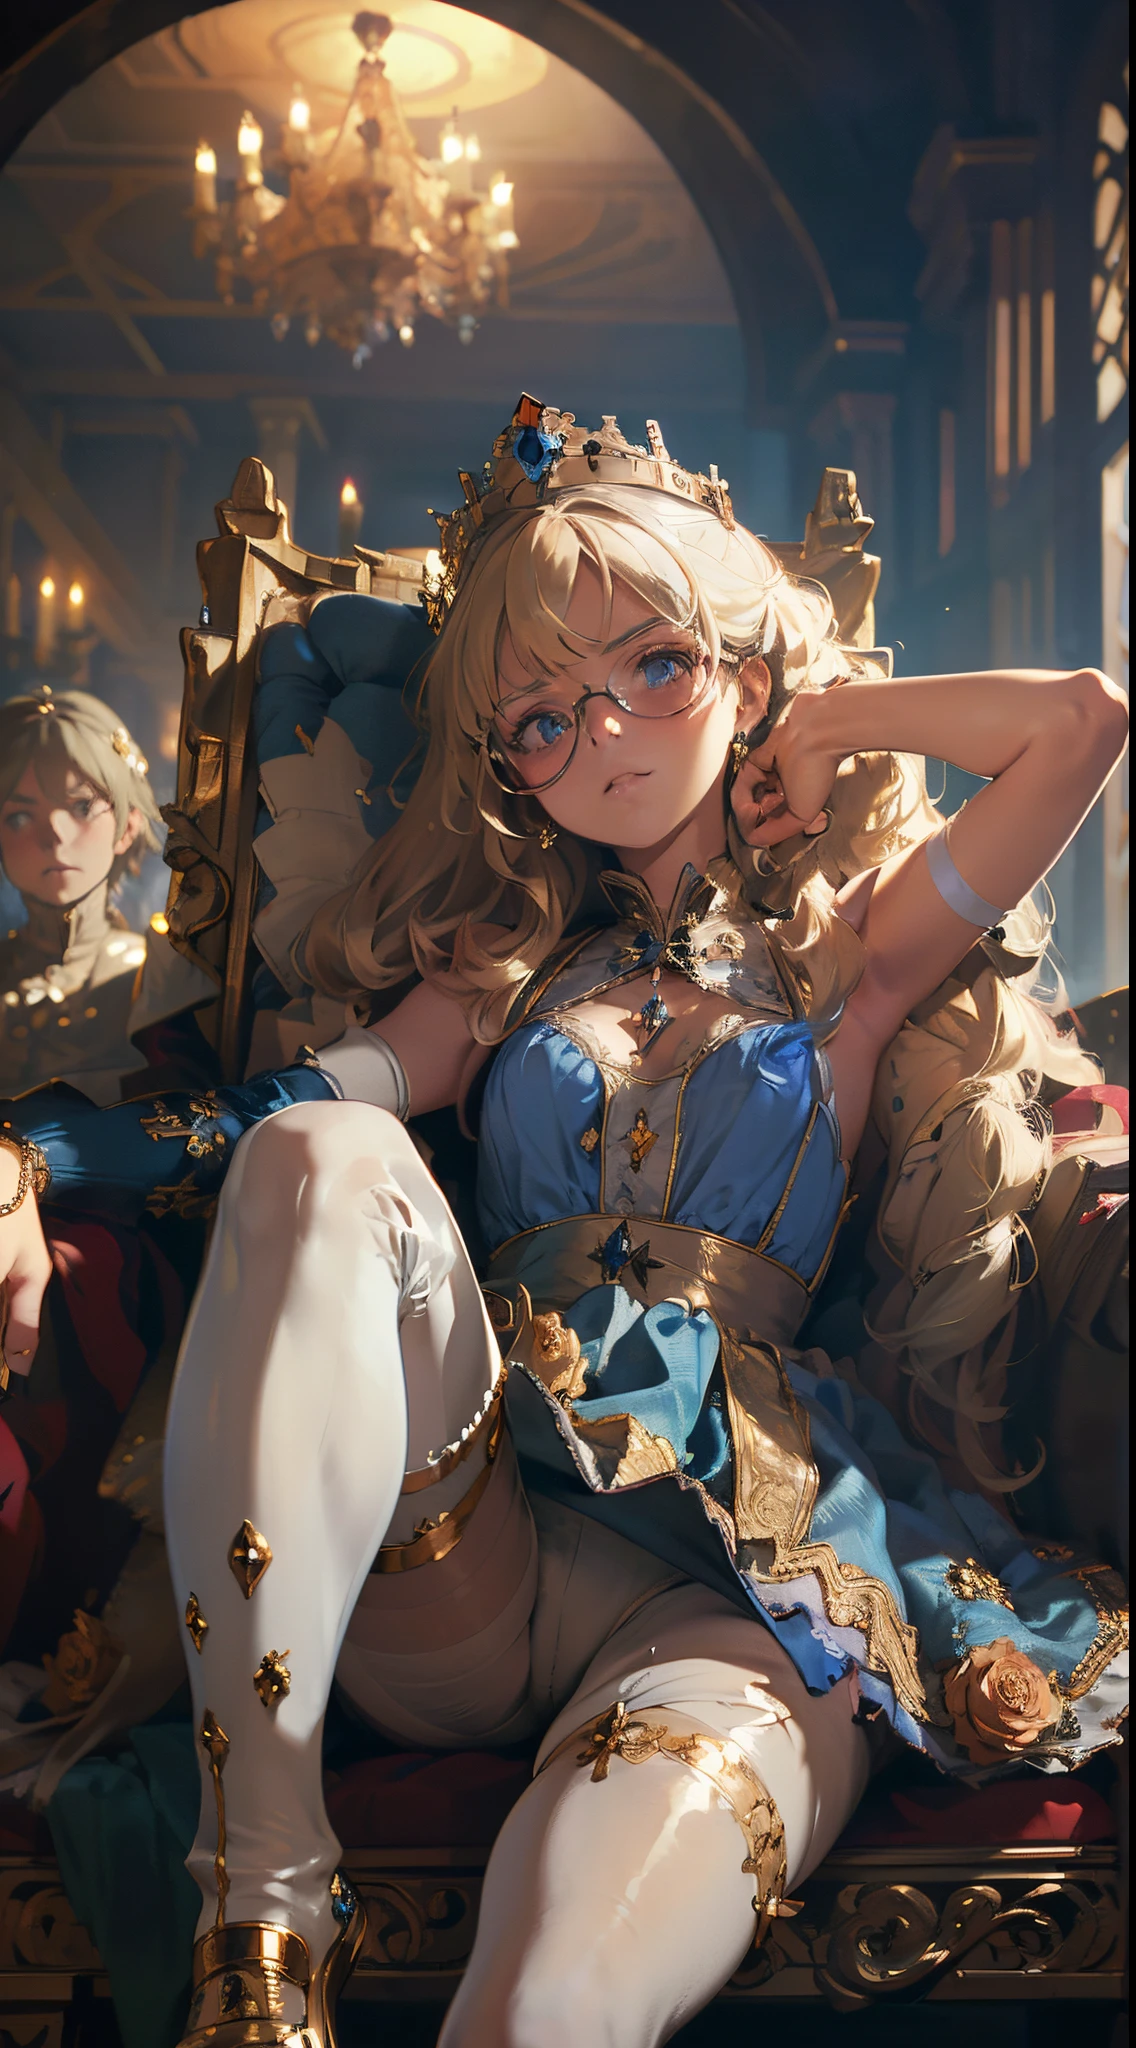 (The highest image quality, master piece:1.2), (Ultra Definition Illustration), (very beautiful littele princes:1.3), (12yo:1.3)  (1 girl:1.2), Solo, nsfw,  (shoot from very below:1.3) ,(condescending look:1.3), (sleeveless gorgeous queen blue dress with roses:1.3), sitting on the throne chair, queen crown, (armpit), spread legs, white panty:1.3), full body, Round baby face, (Glasses, Blonde Short-Cut Hair), (white thigh high pantyhose:1.3), (Evil smile, mean expression), Luxurious palace rooms, Fancy Room, rpgroyalty,